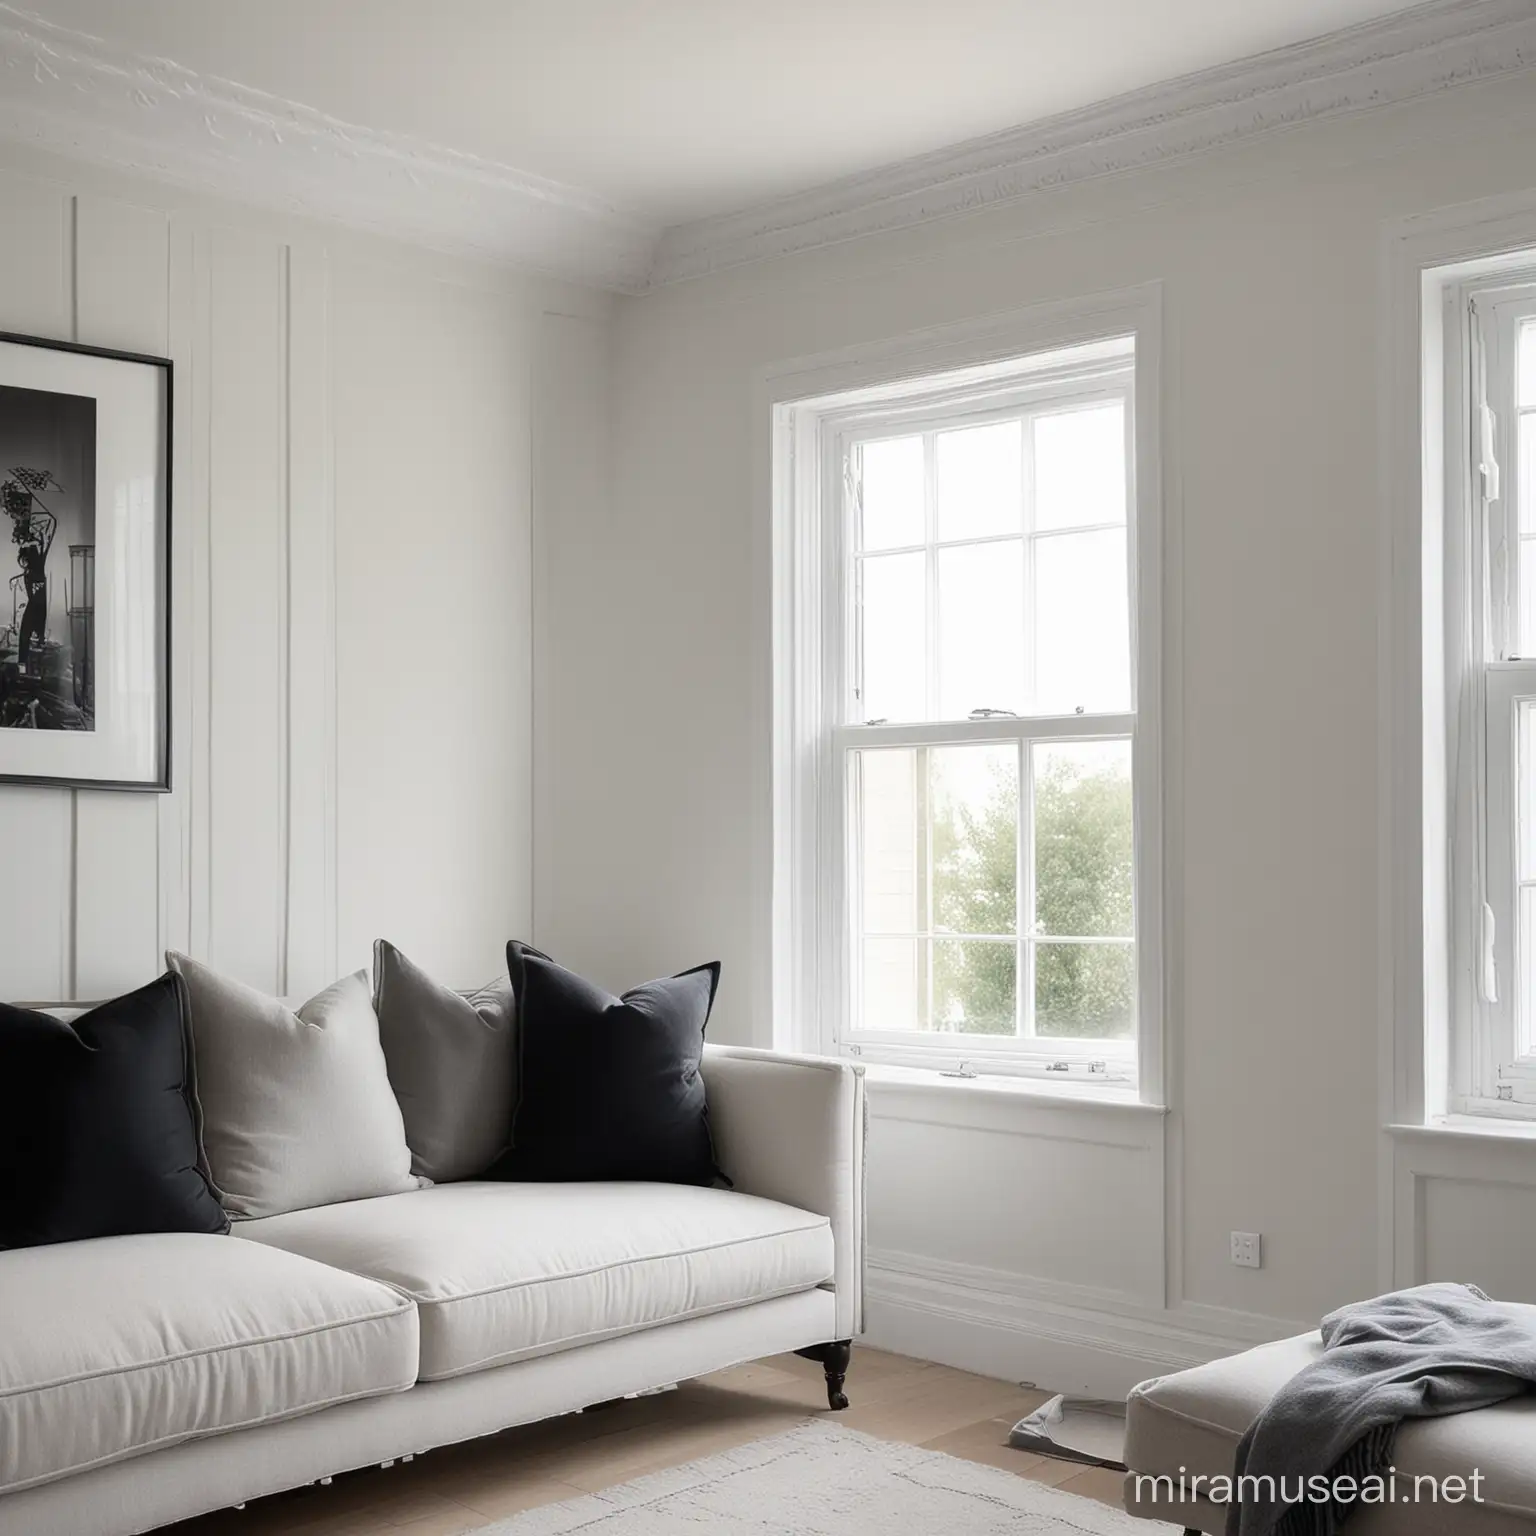 looking into the corner of a living room. large plain white panelled walls. sofa with grey and black pillows. window to left.